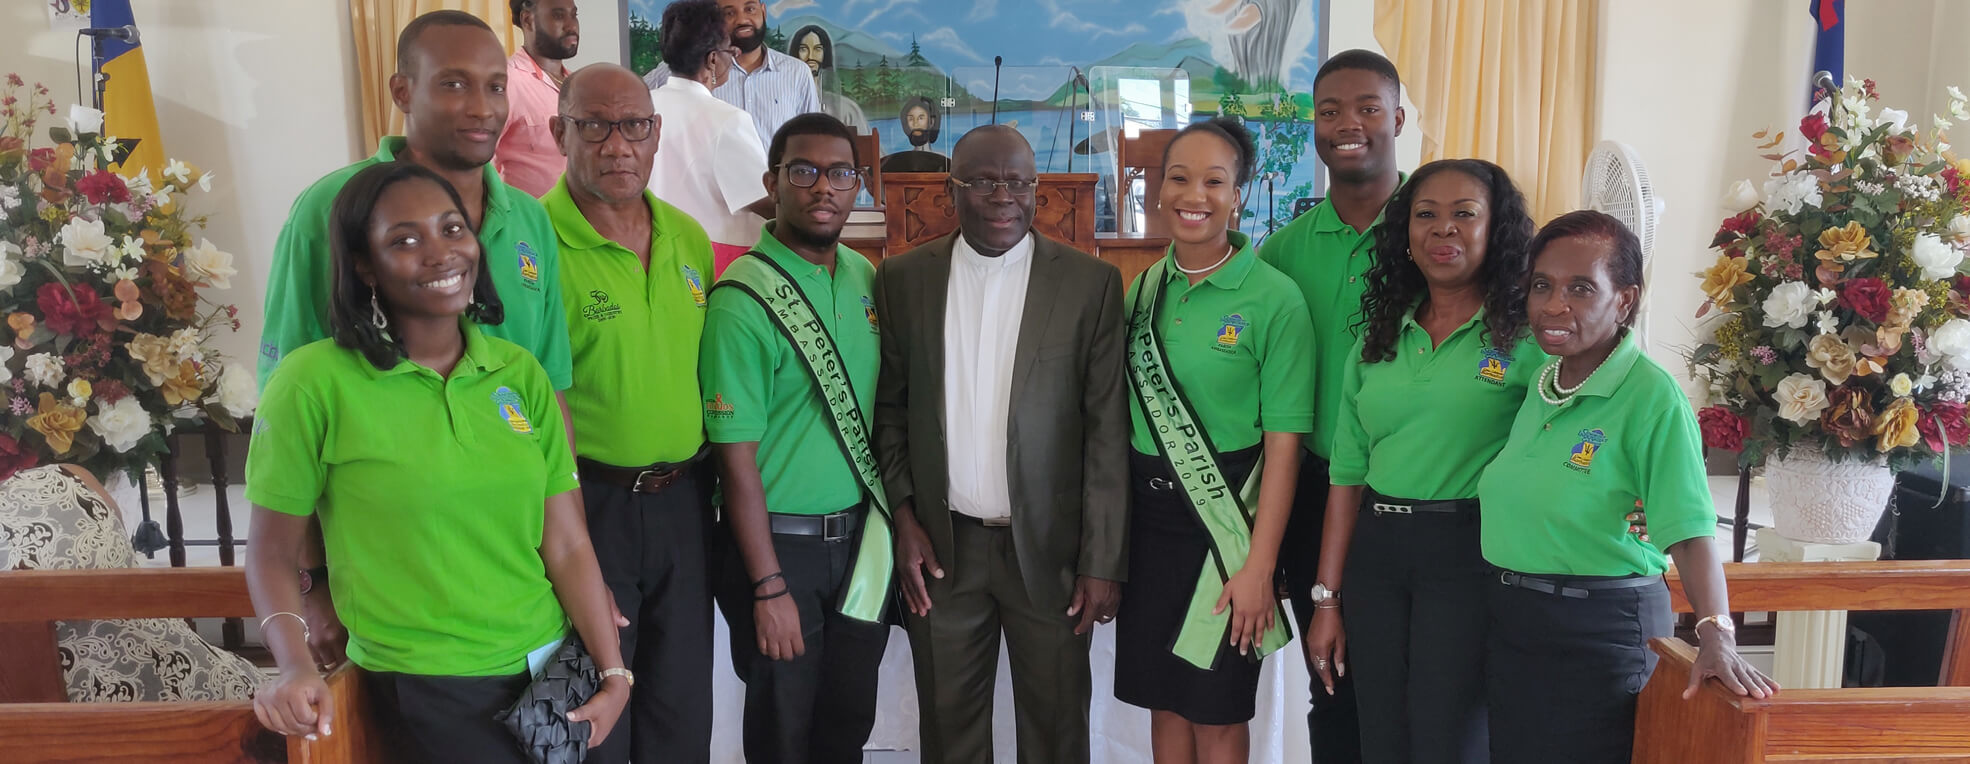 St.Peter Parish Independence Committee: St. Peter Parish Ambassadors Project Launch 2019 